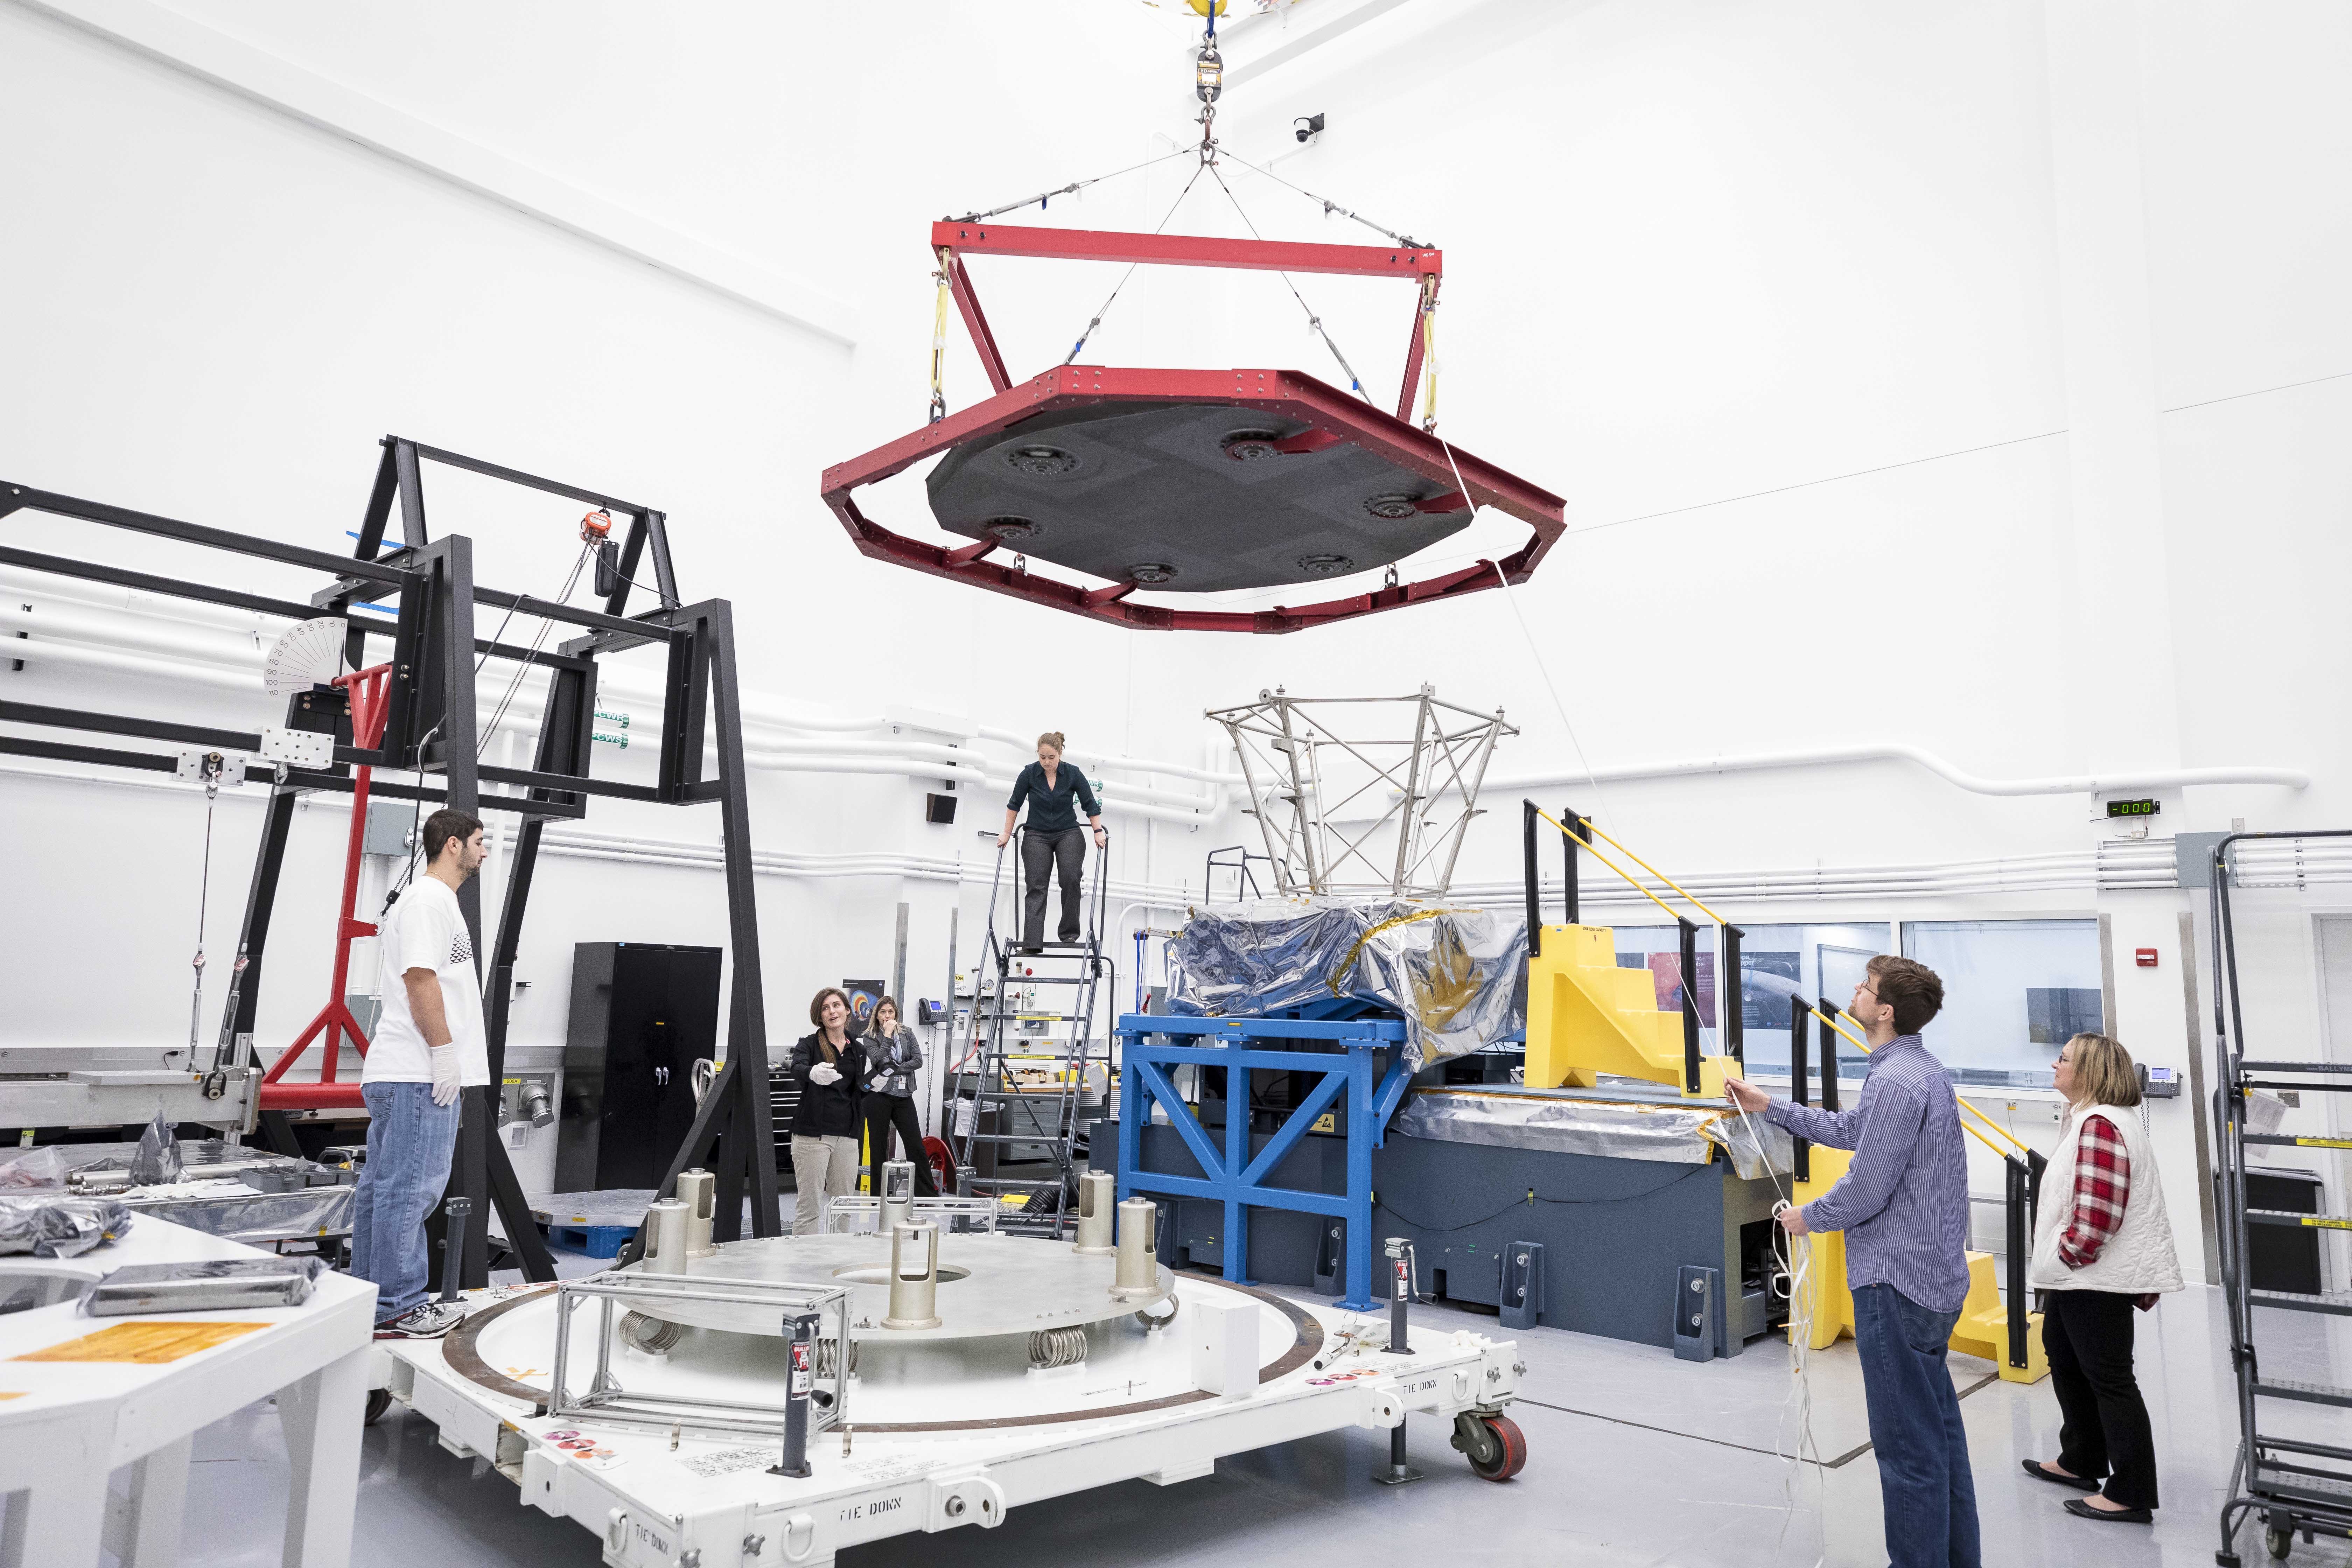 The Parker Solar Probe spacecraft's Thermal Protection System (TPS), or heat shield, is carefully moved to a shipping container for transport from Johns Hopkins APL to NASA's Goddard Space Flight Center and further environmental testing.